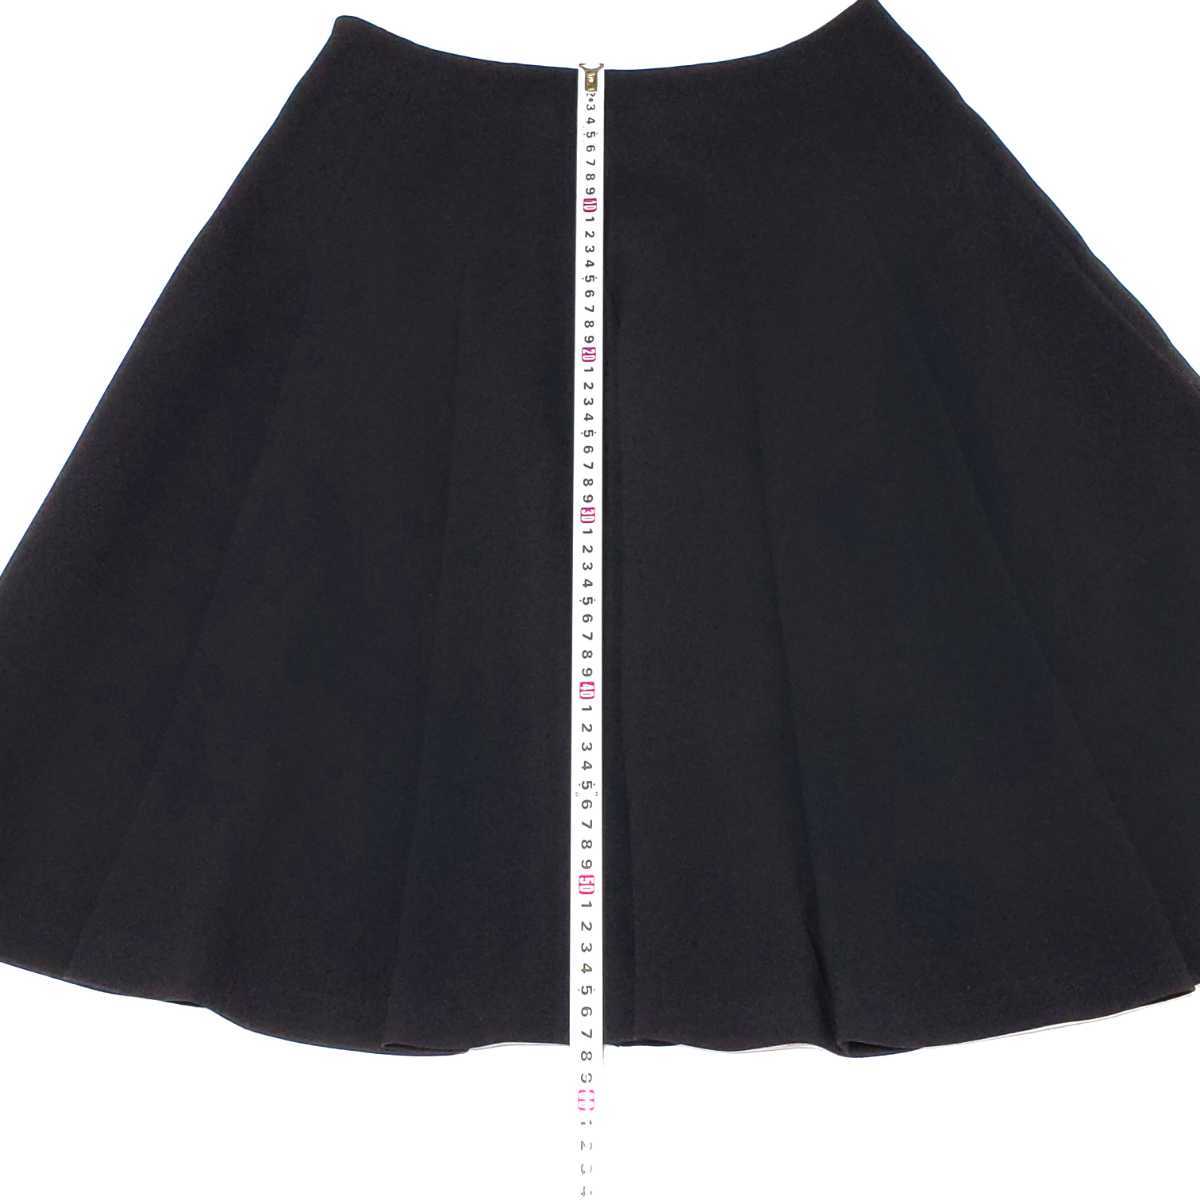 TO BE CHIC toe Be Schic black knees height skirt size 40( approximately L size corresponding )